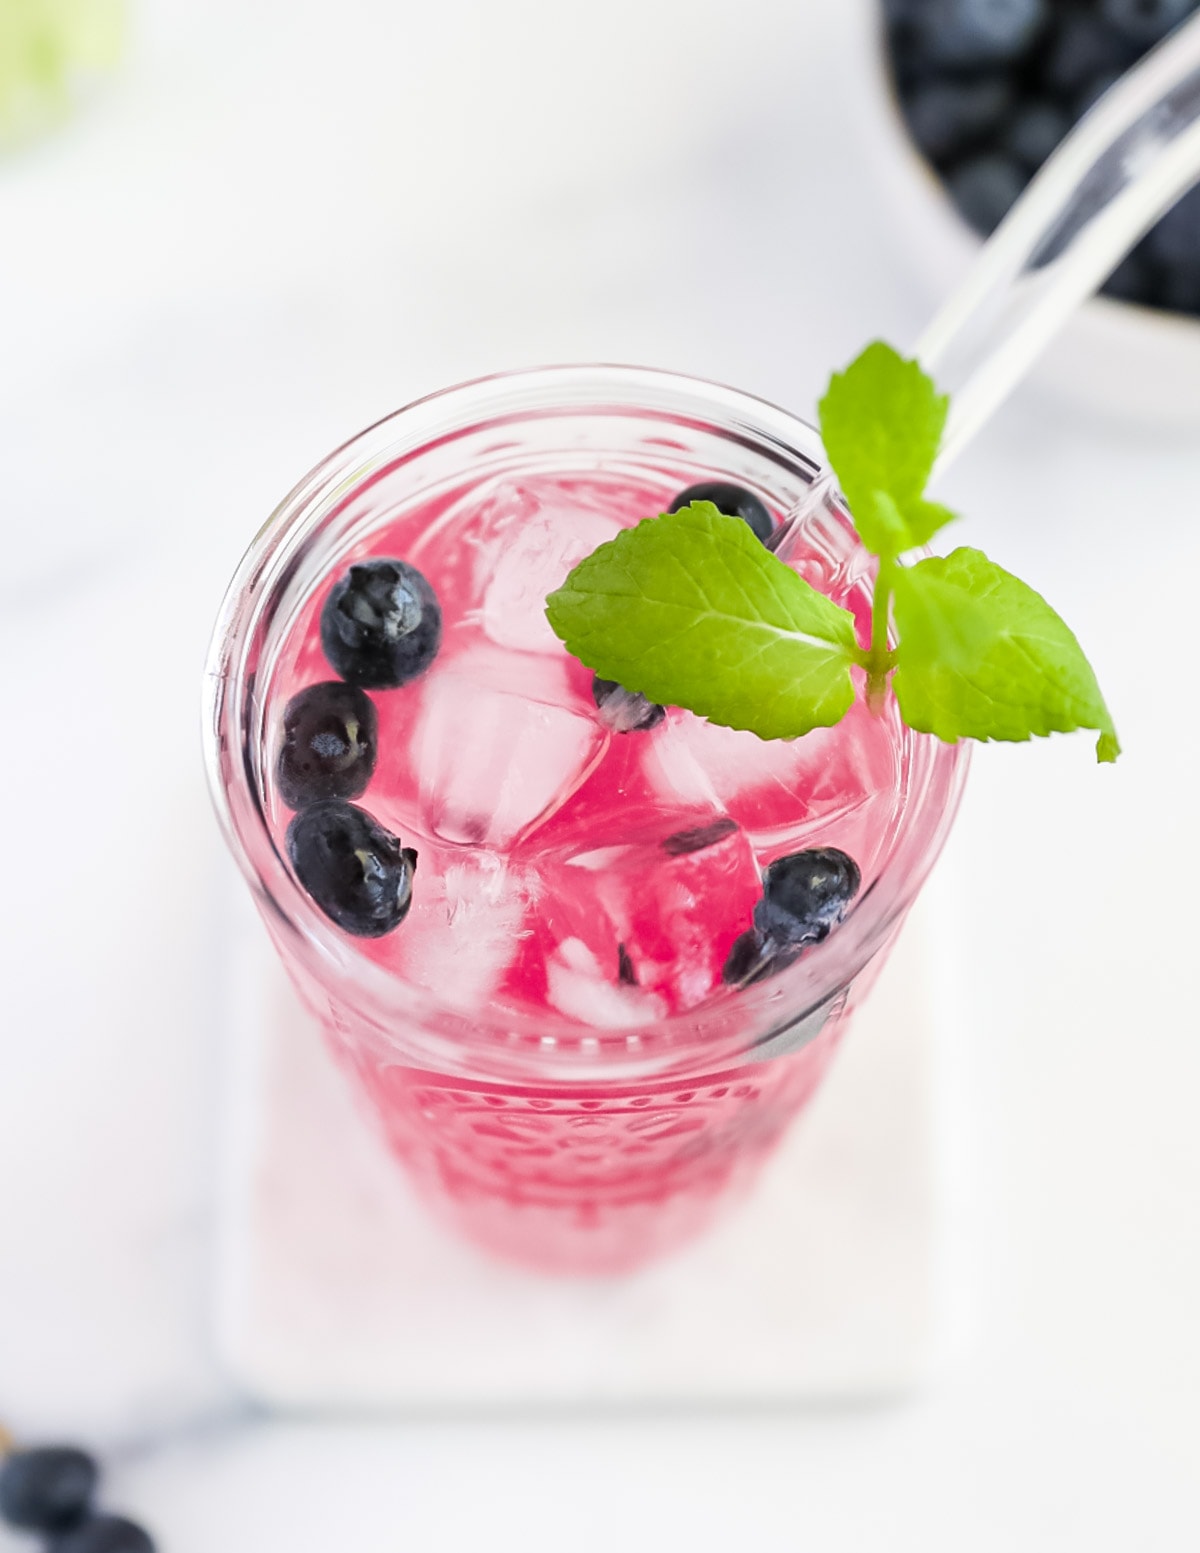 An overhead picture of a glass filled with bright pink lemonade. There are berries, mint, and ice cubes, along with a glass straw in the cup.